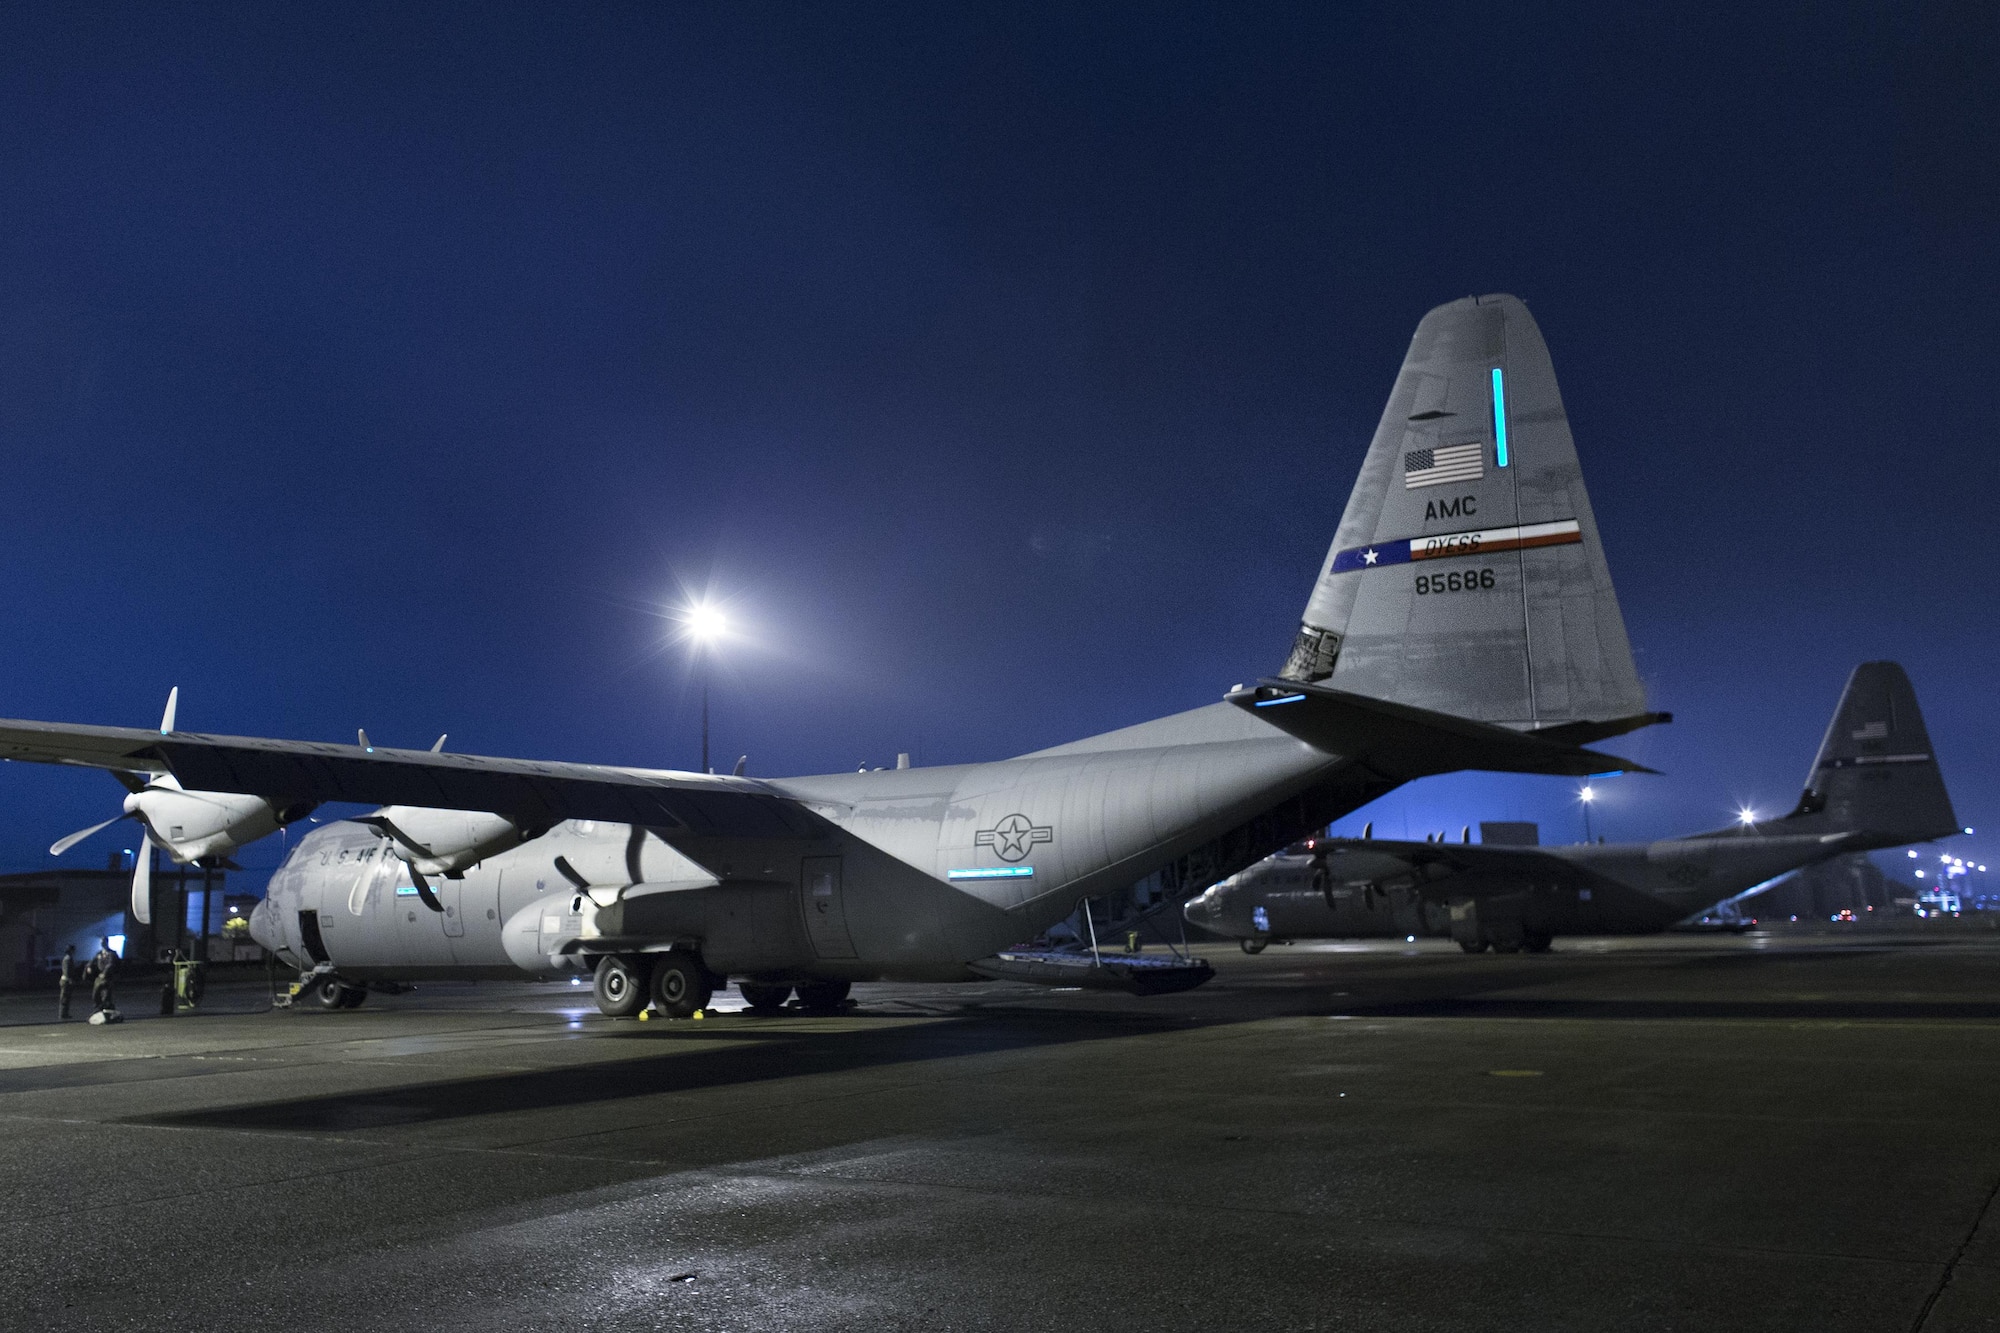 Two C-130J Super Hercules sit on the flightline at Yokota Air Base, Japan, July 21, 2016, during a training flight. Three C-130Js from Dyess Air Force Base, Texas, traveled to Yokota to aid in transition from C-130Hs to C-130Js. Fourteen C-130Js are scheduled to start replacing Yokota’s C-130Hs later this year, which have been in service since 1974. (U.S. Air Force photo by Yasuo Osakabe/Released)  